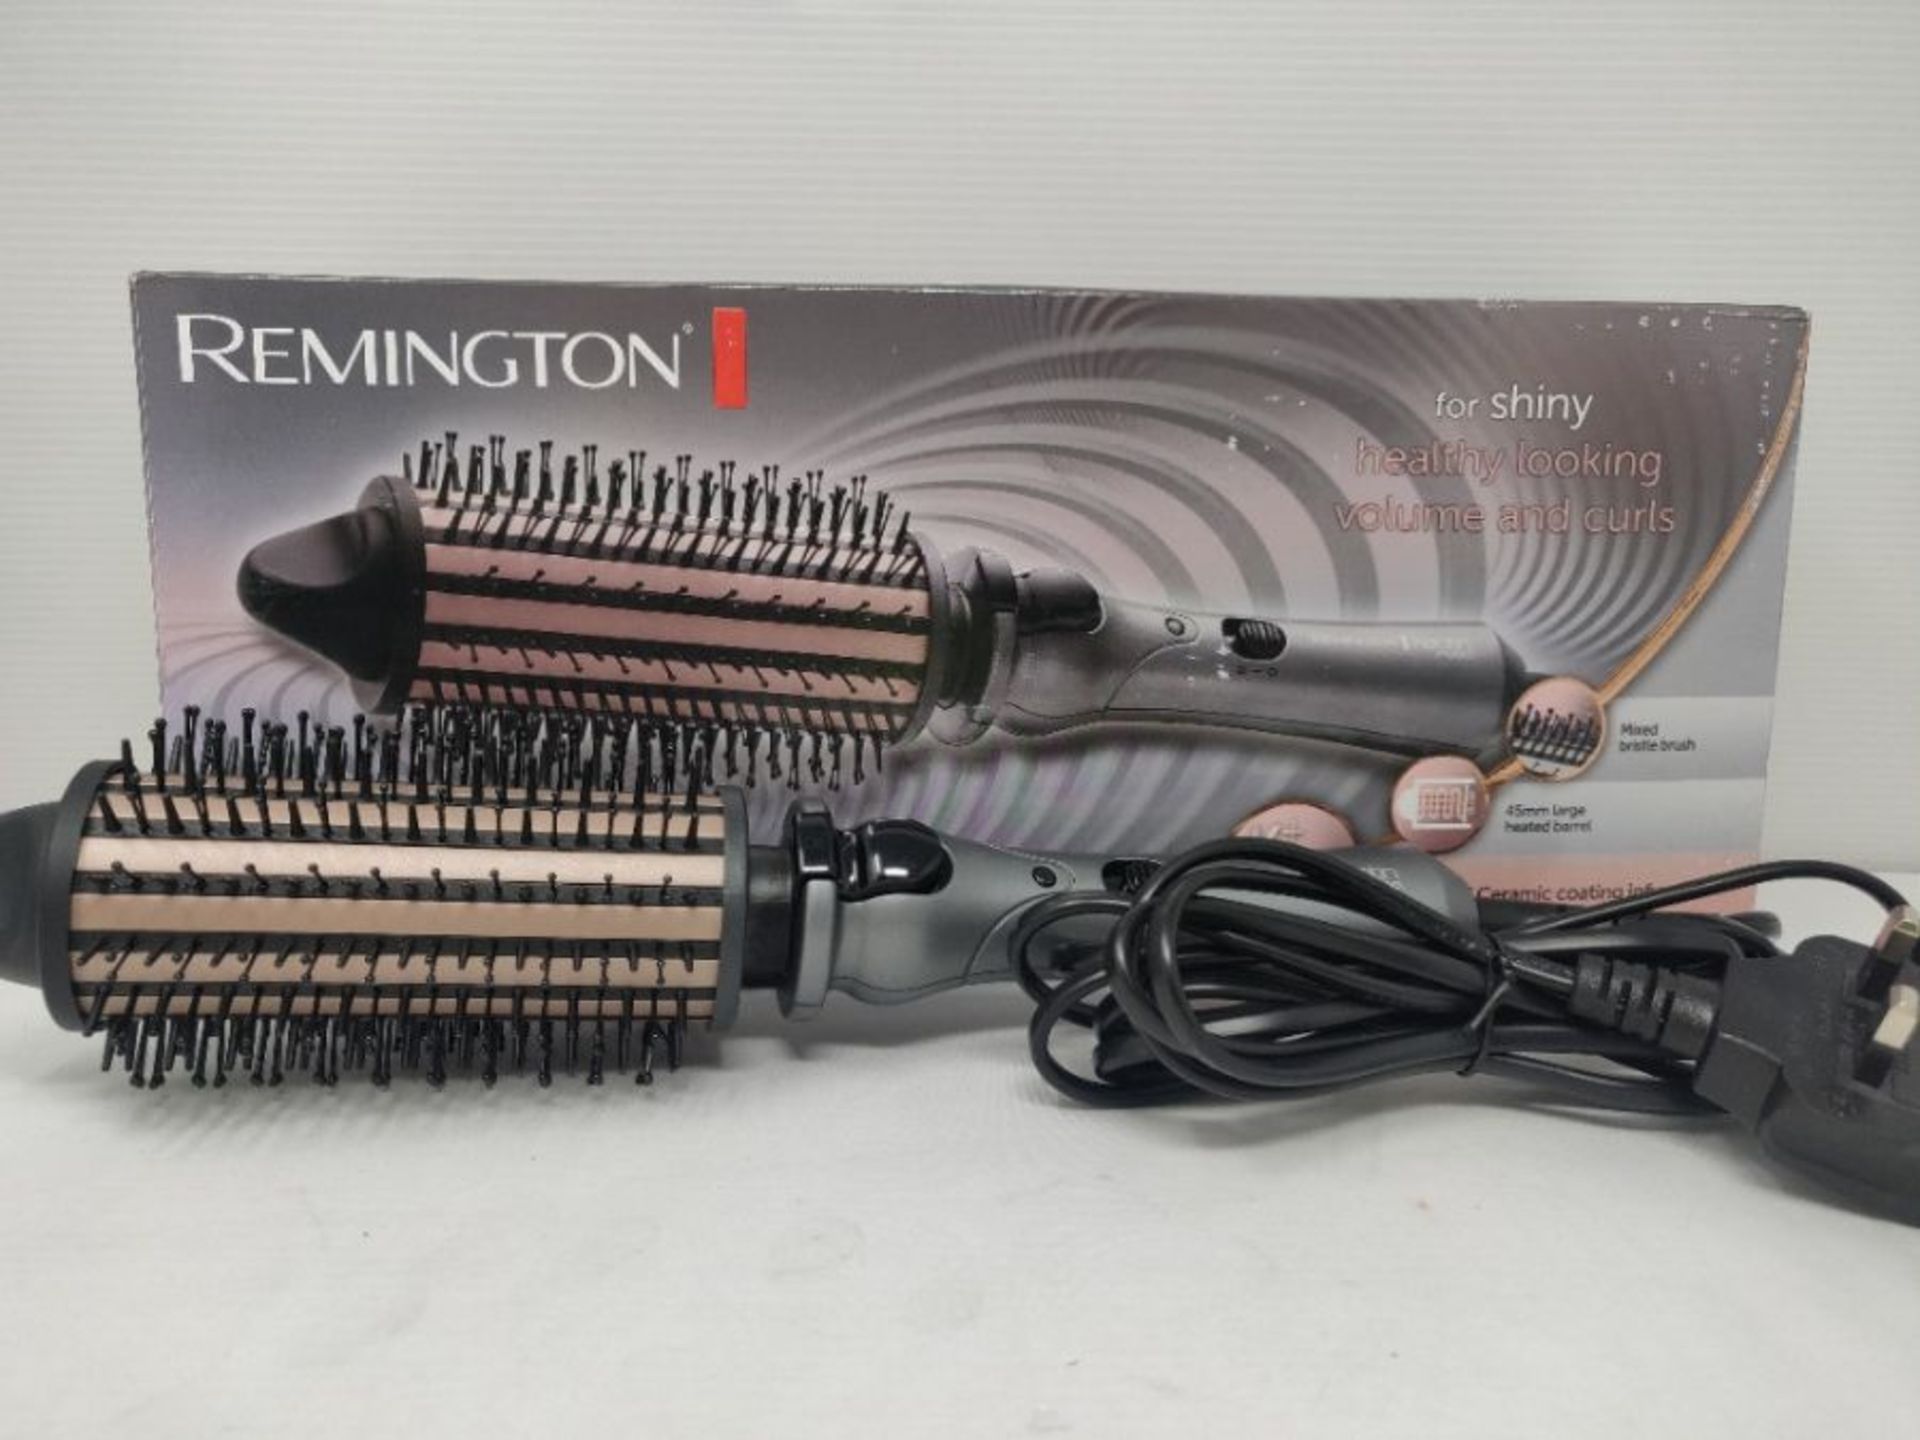 Remington Keratin Protect Heated Barrel Hot Hair Brush, Infused with Keratin and Almon - Image 2 of 2